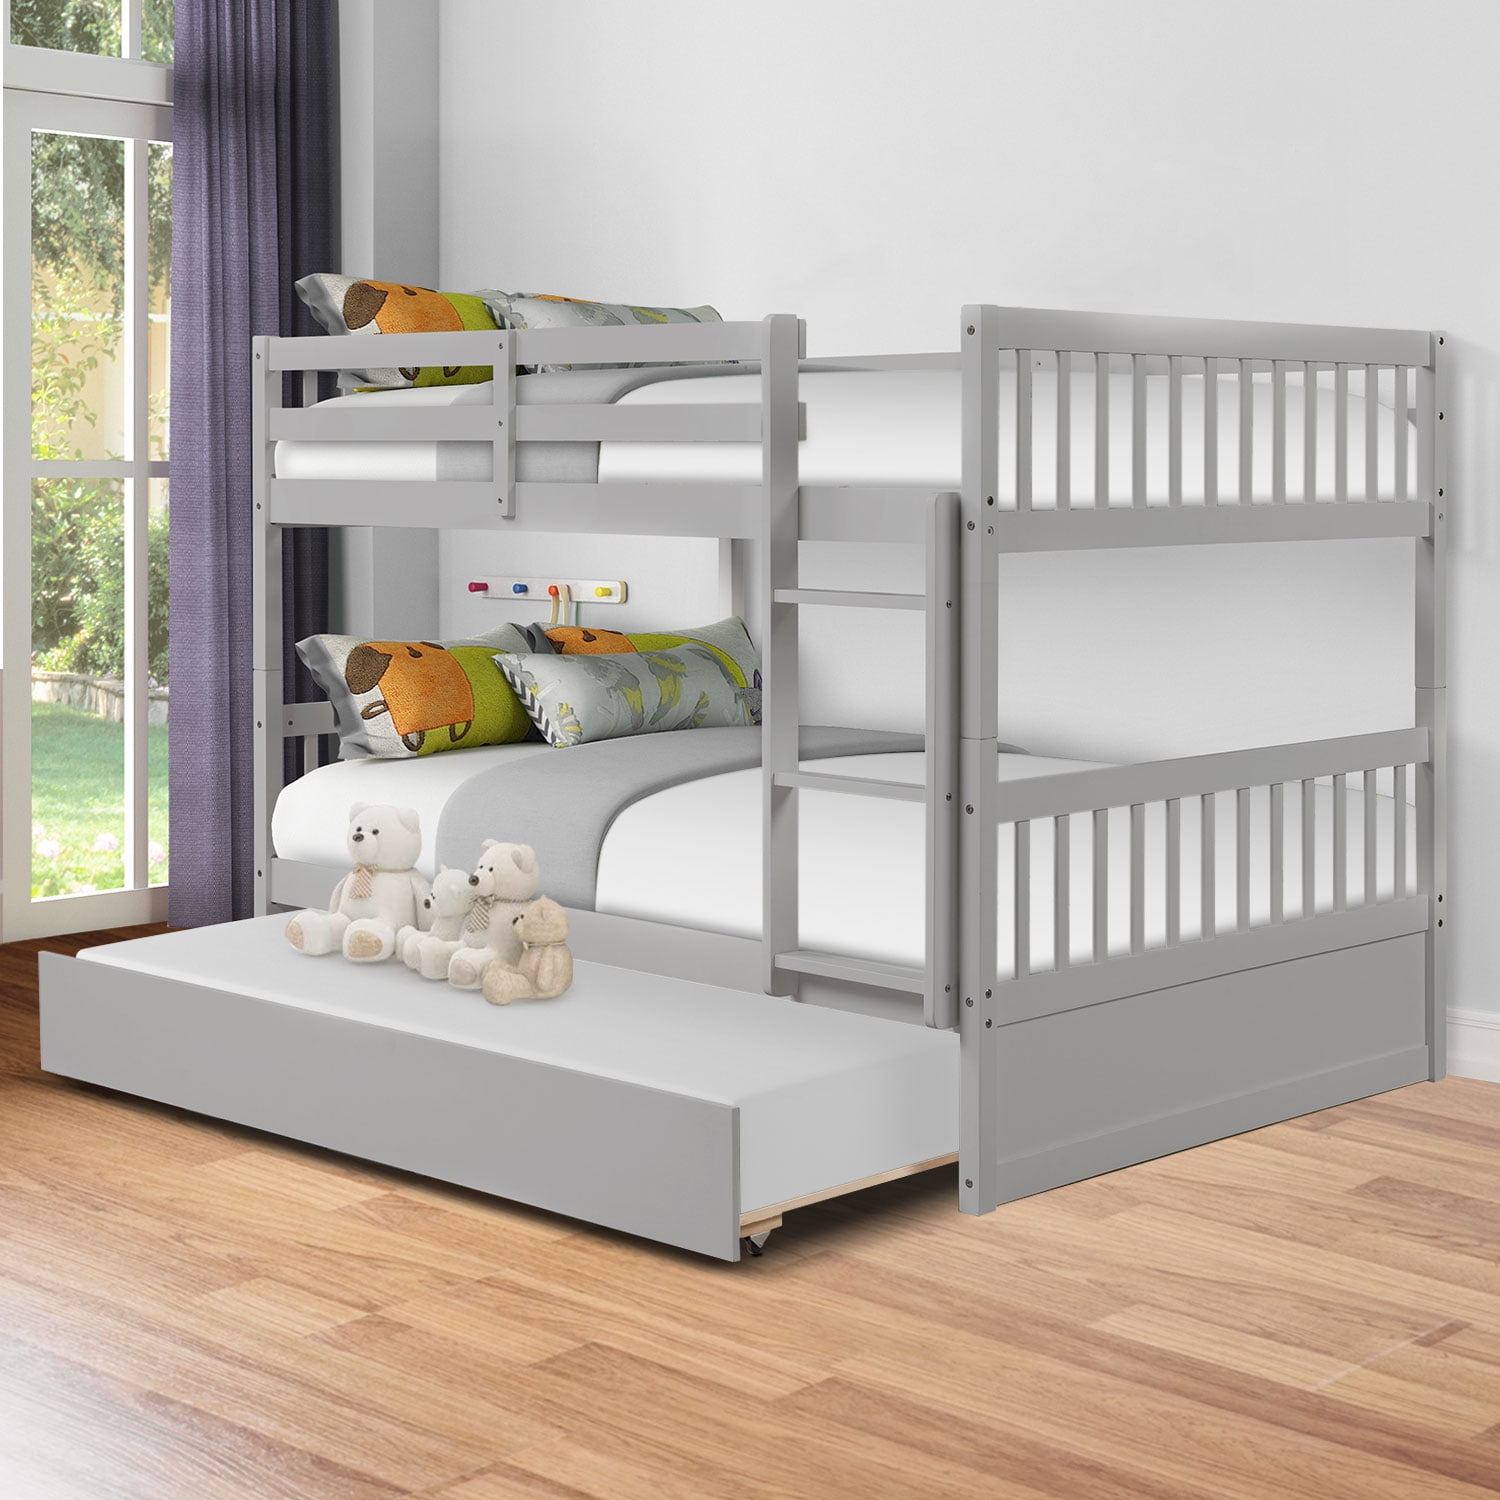 Trundle Sweden Pine Wood Bunk Beds, Bunk Beds That Separate